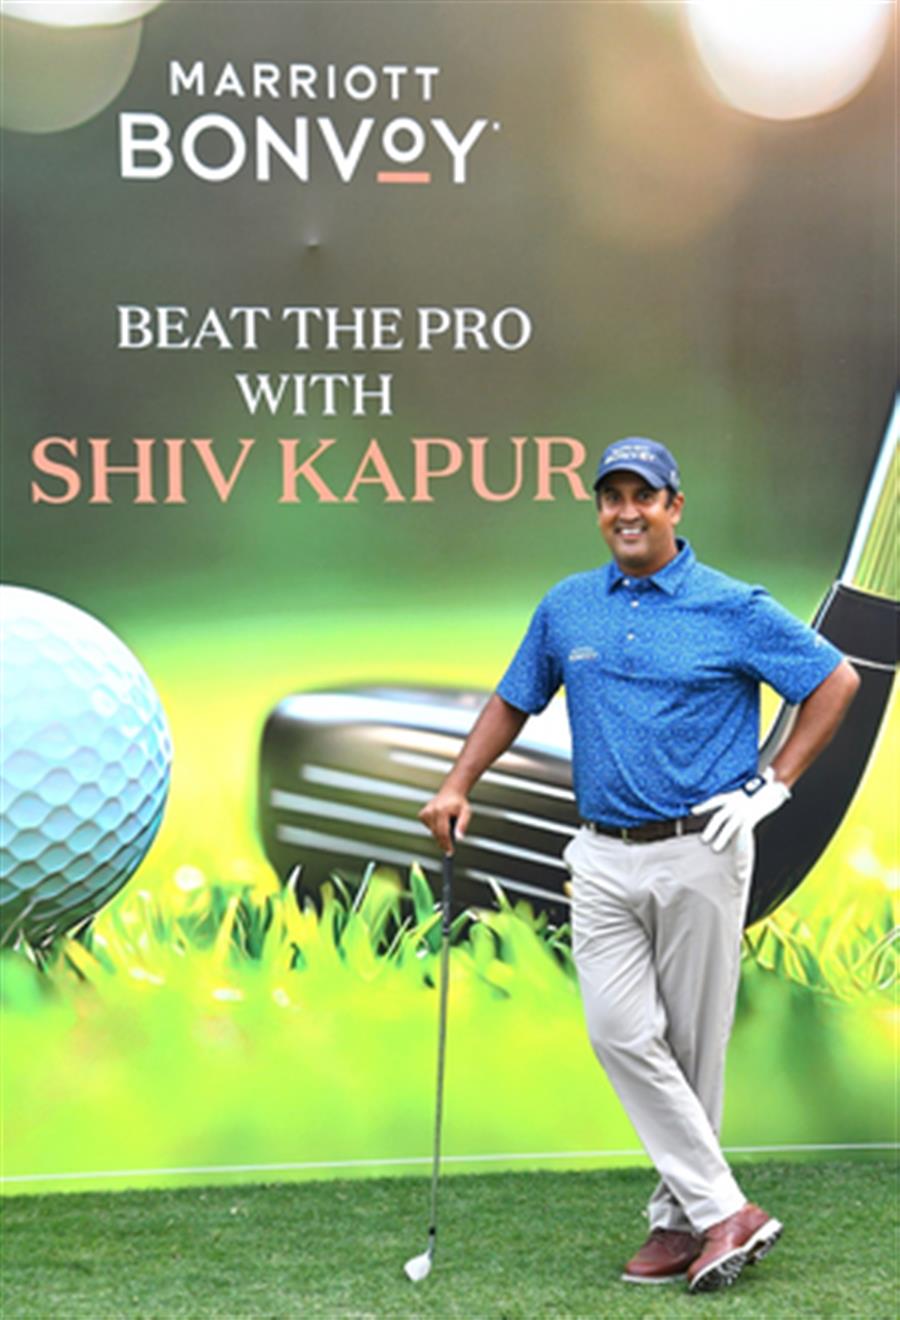 What separates the good from great is the mental edge and toughness you need under pressure: Golfer Shiv Kapur